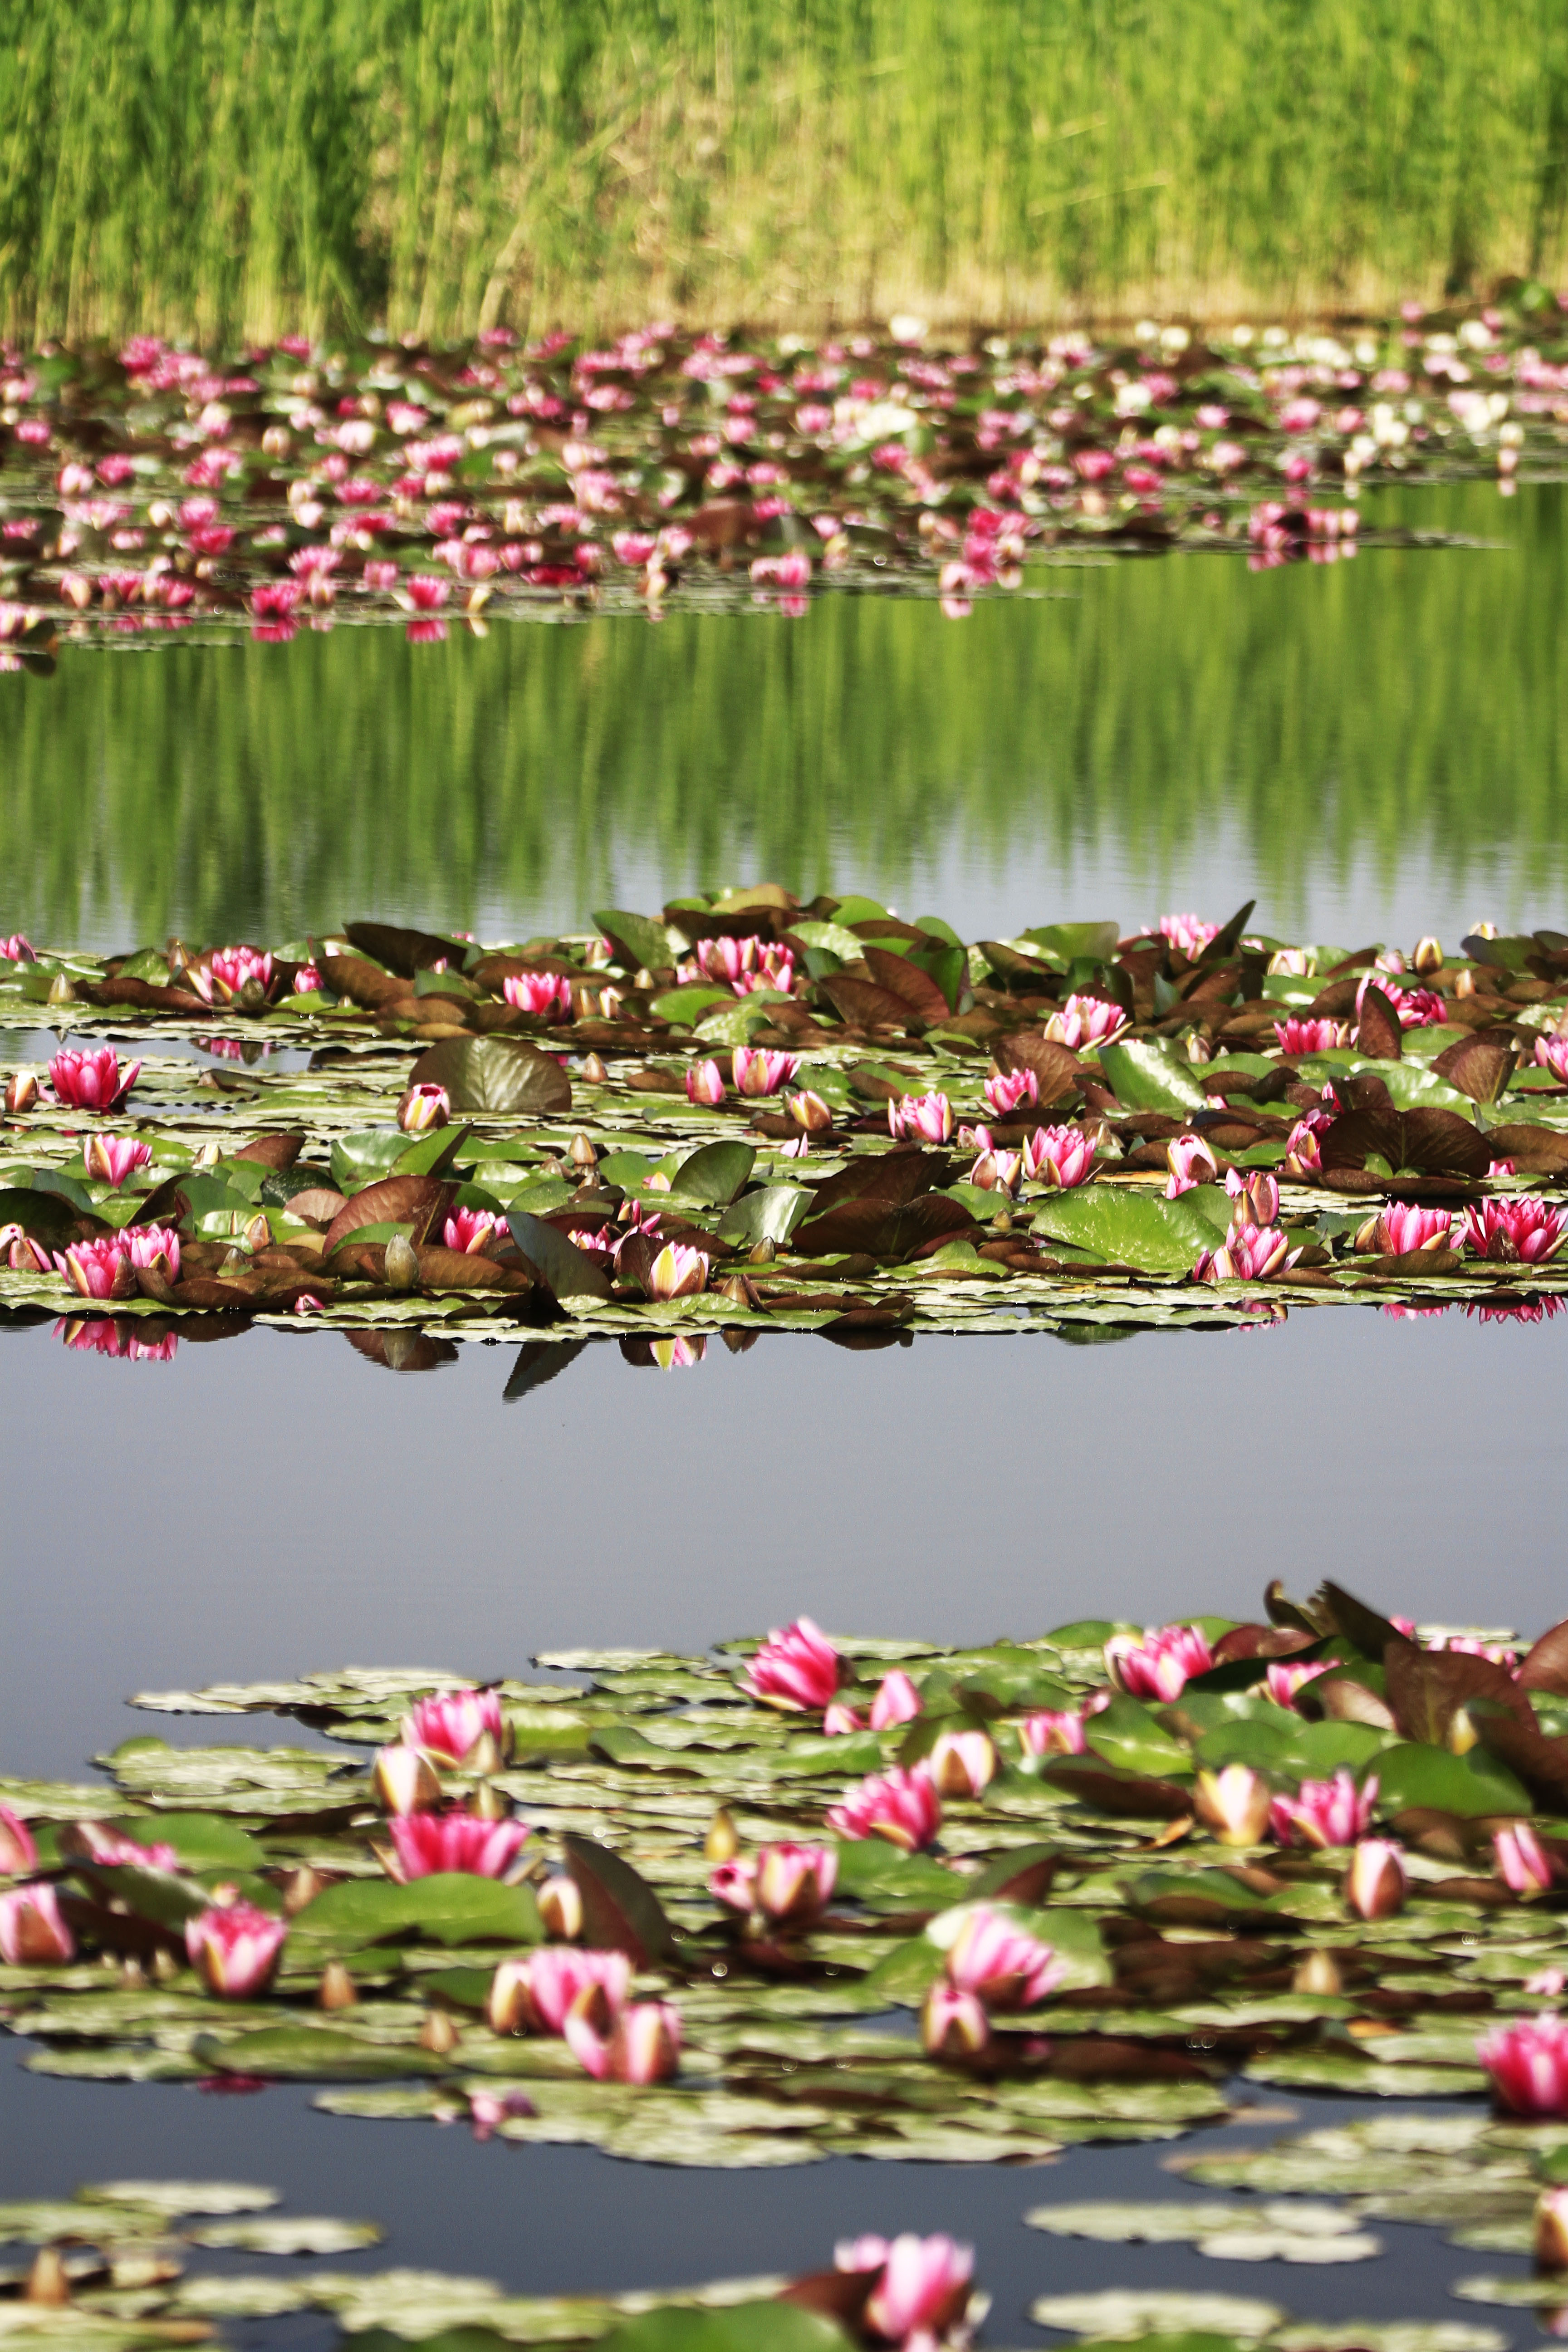 Water lilies are in full bloom at the Zhangye National Wetland Park in Gansu. /CNSPHOTO